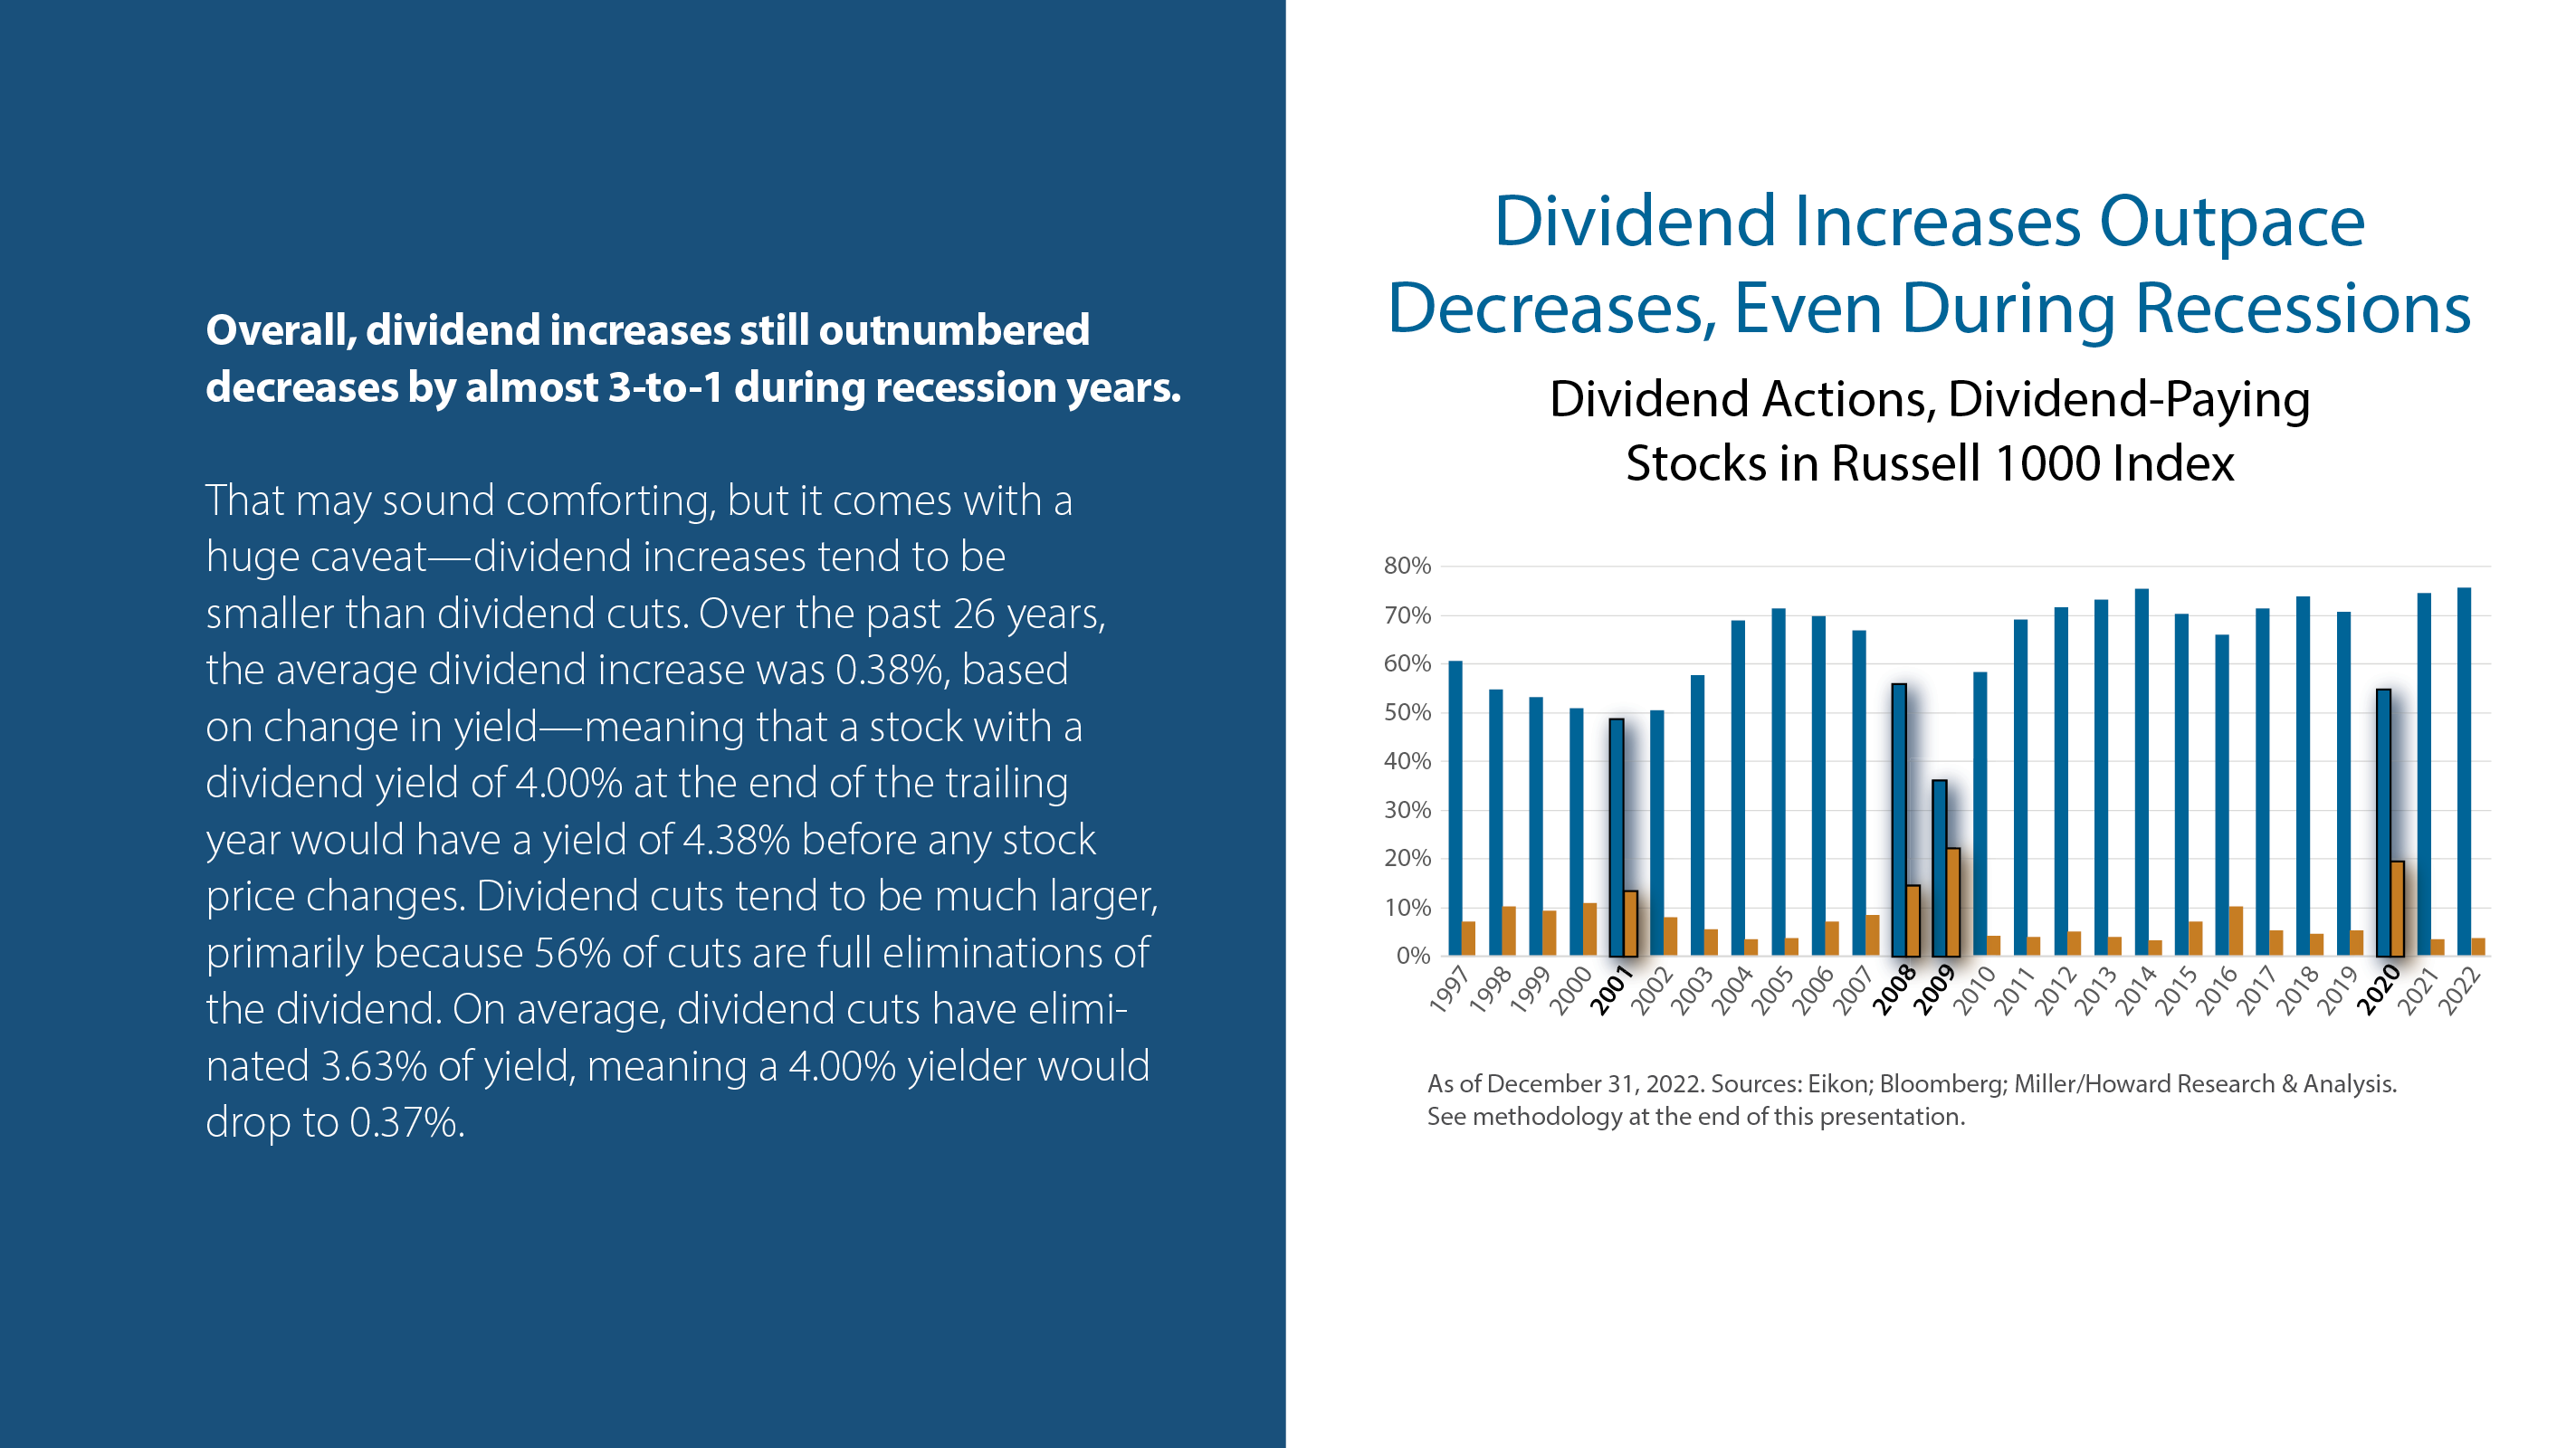 Overall, dividend increases still outnumbered decreases